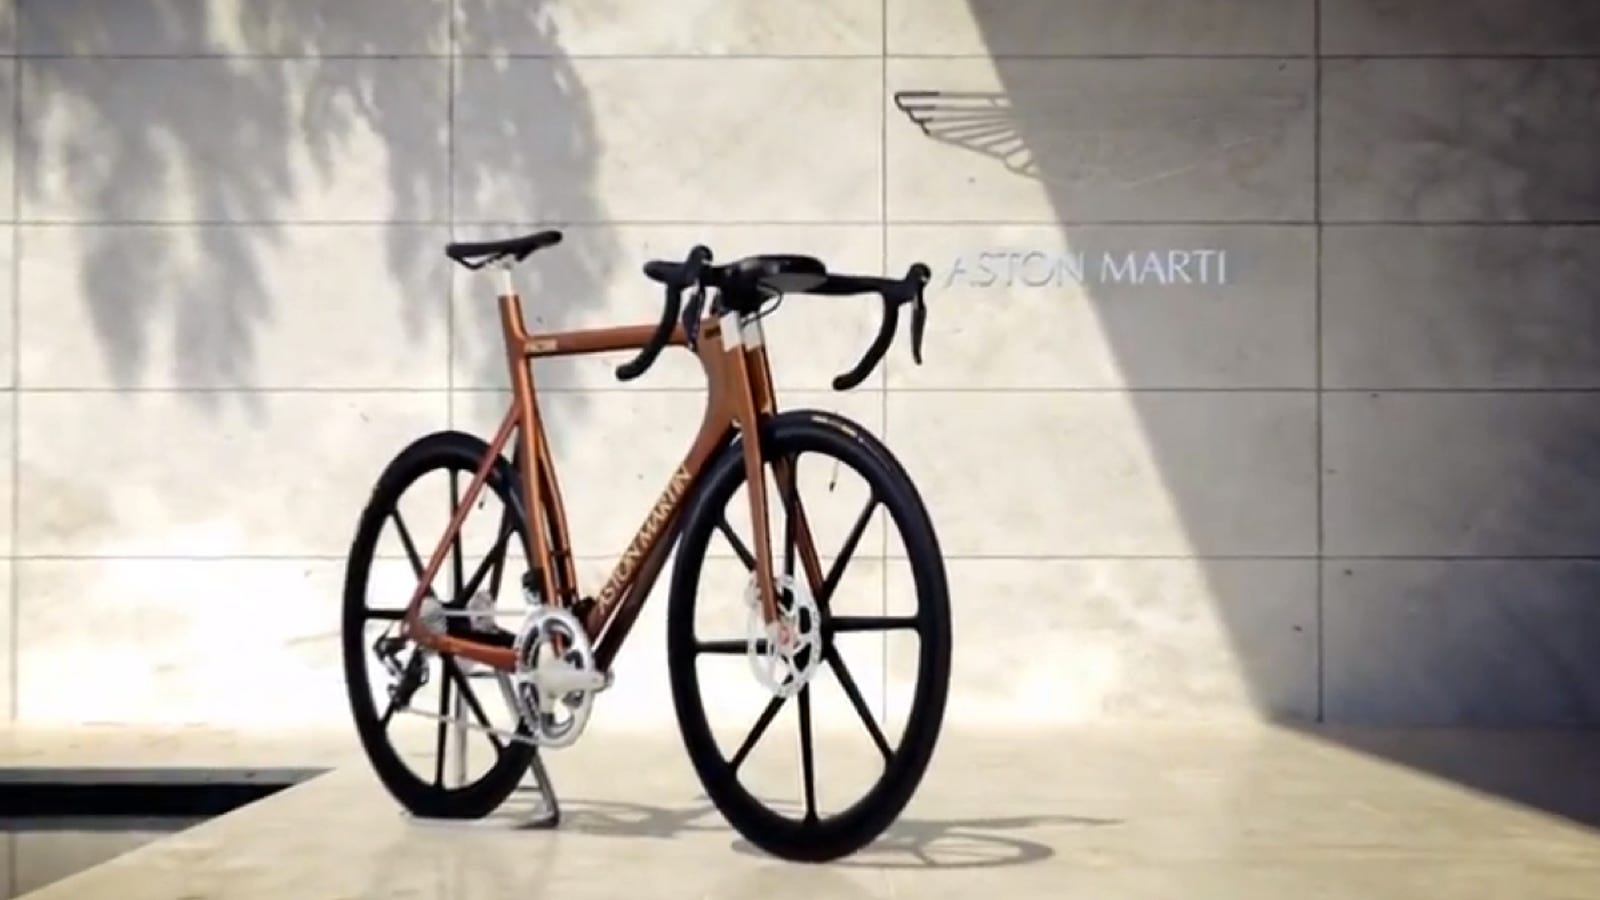 This Aston Martin Bicycle Costs $39,000